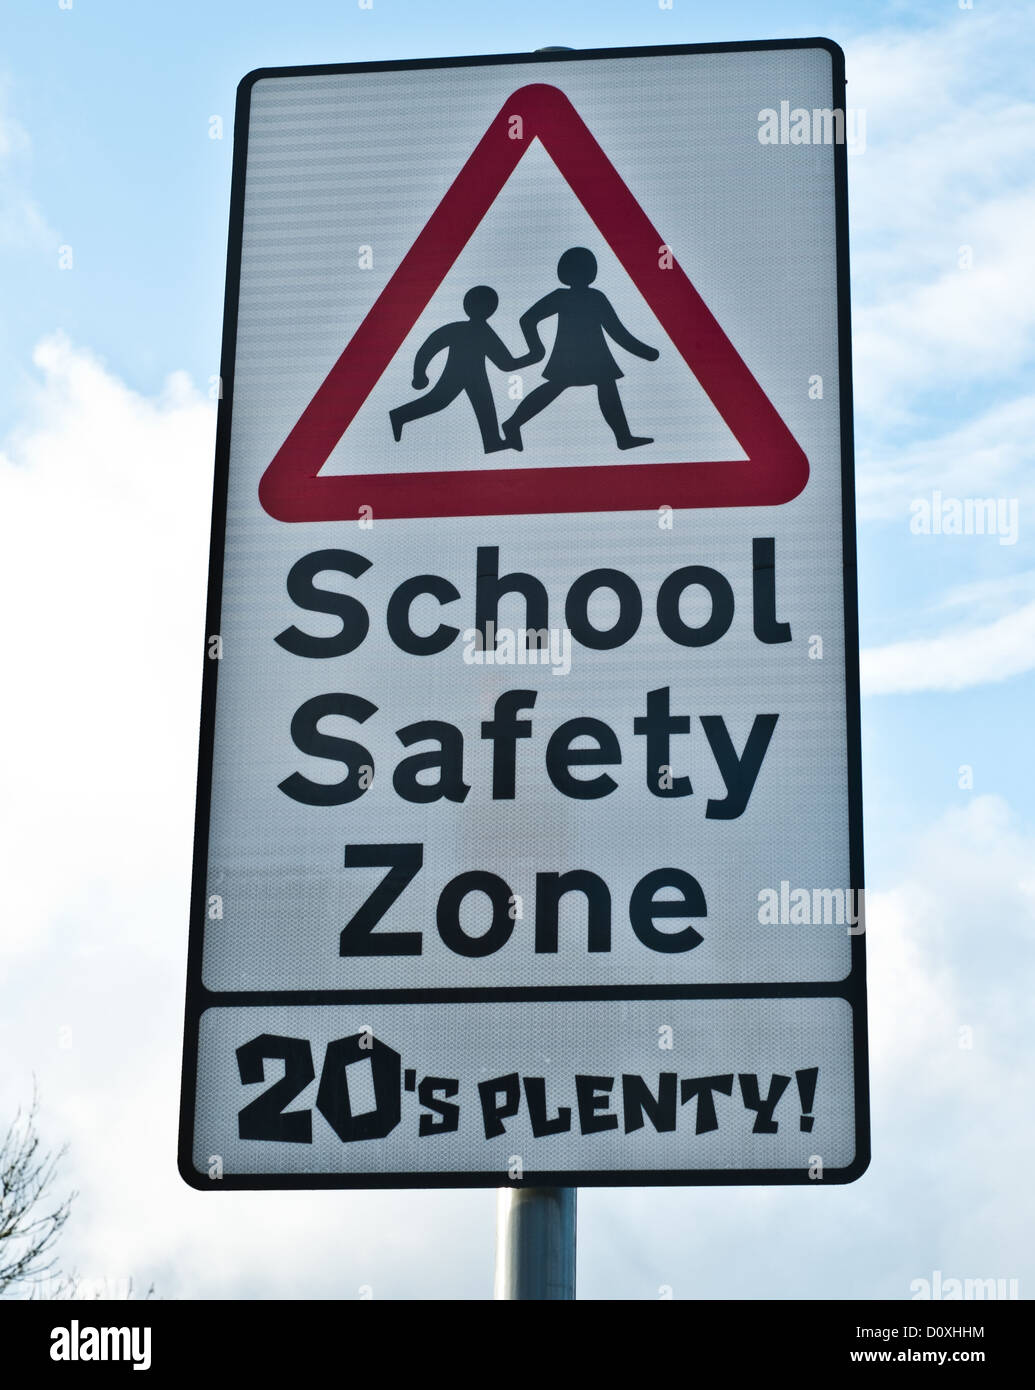 A traffic sign that warns of the 'school safety zone' and instructs driver's to keep to maximum of 20 miles per hour. Stock Photo